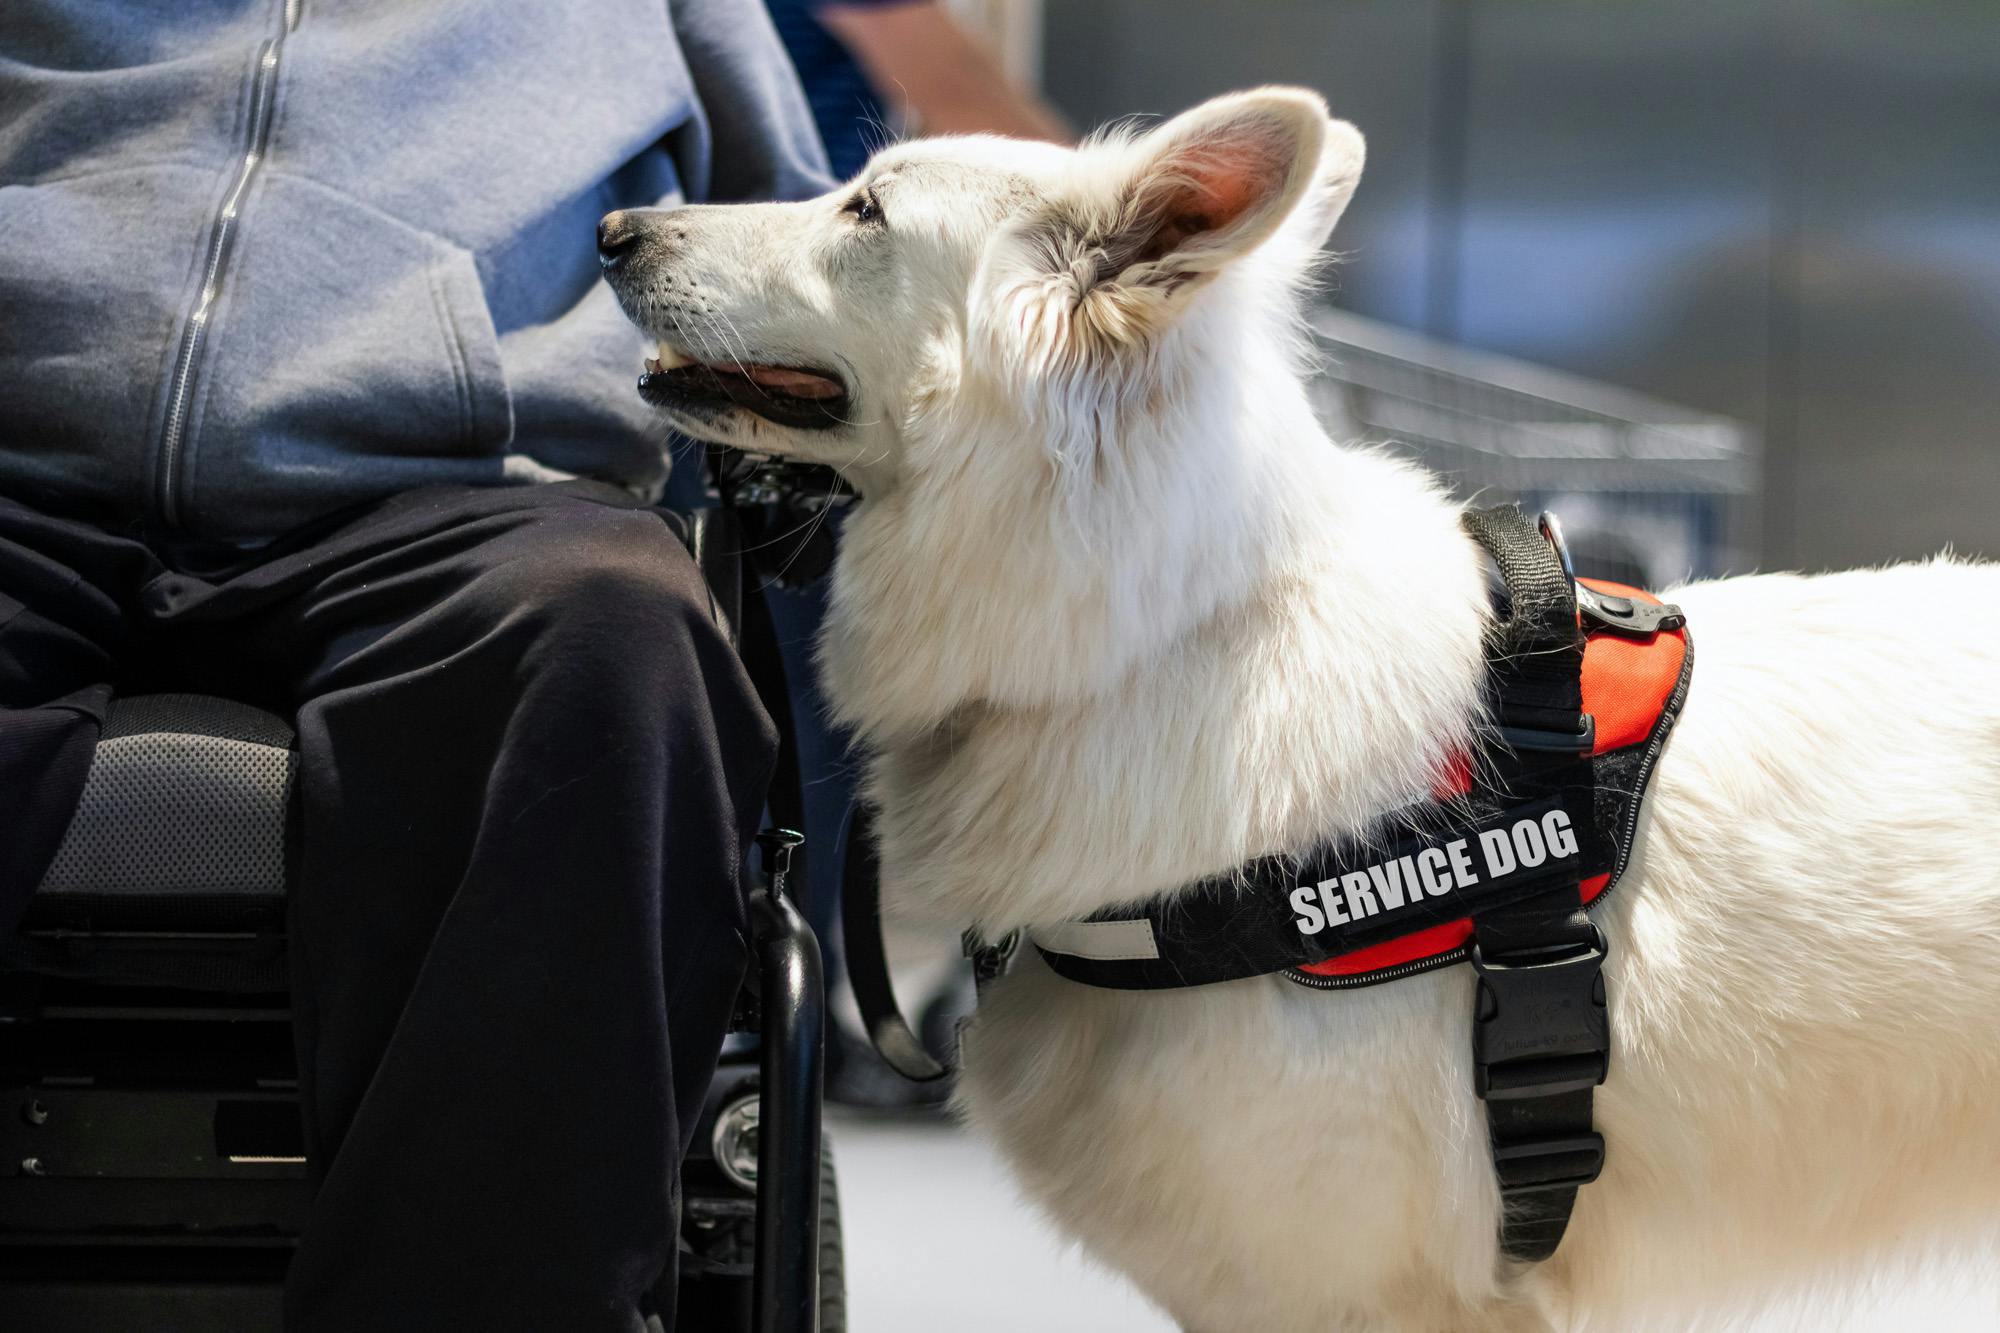 Service dog looking up at person